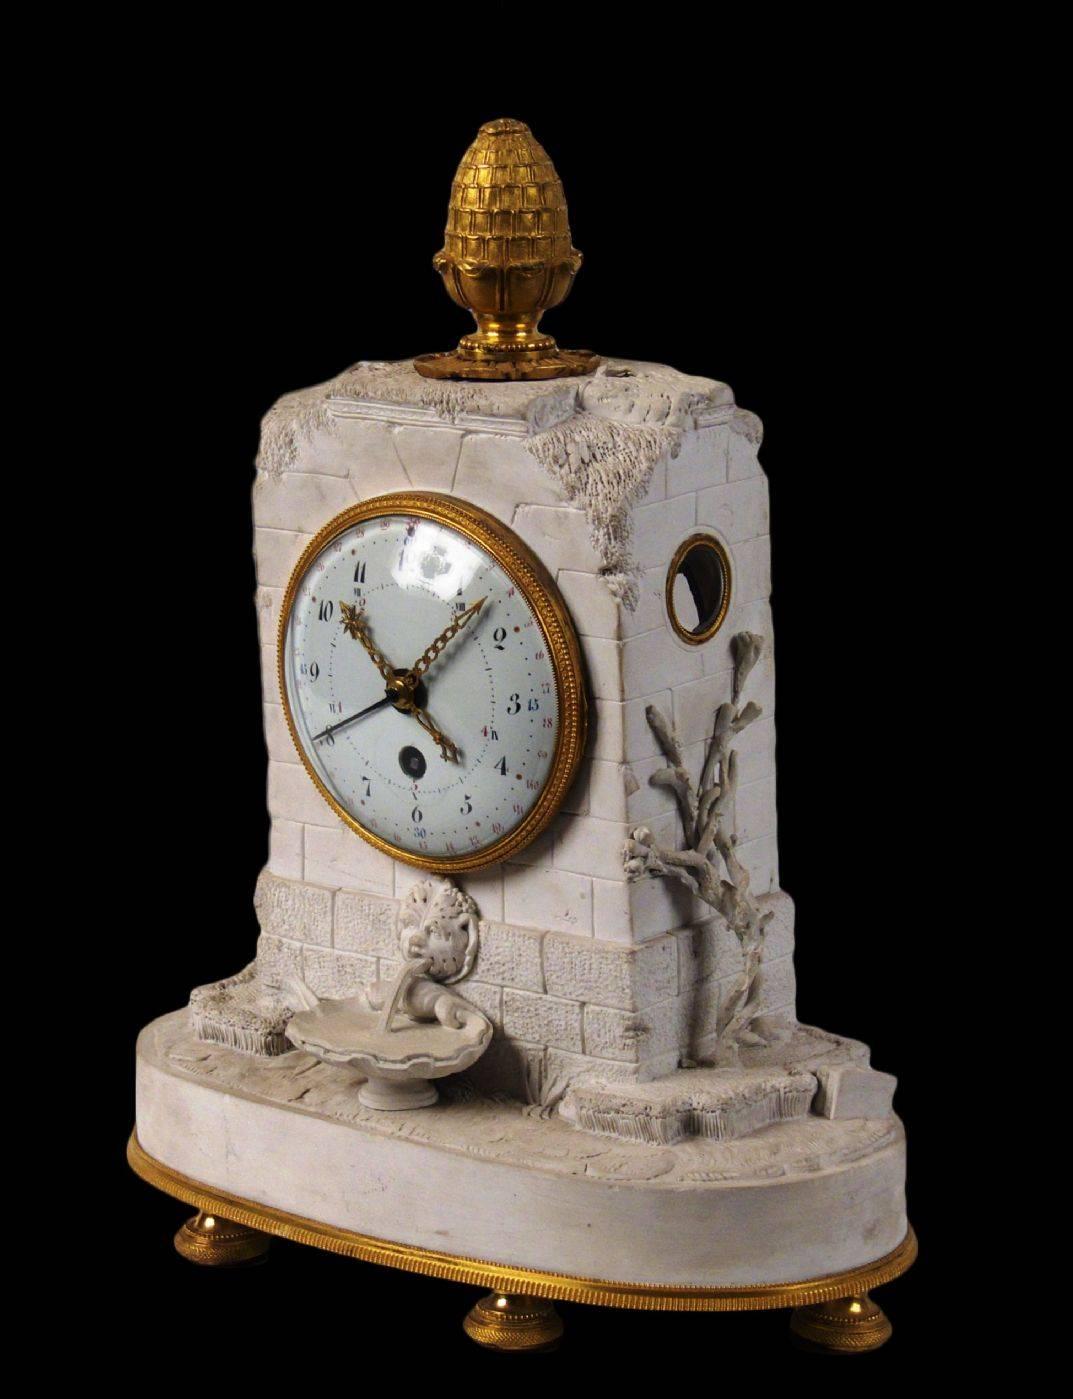 Clock. decimal
Manufacturing: France. Directorate (1793)
Sevrés fabric porcelain biscuit, embossed inside the "Costant" biscuit.
Enamelled dial by Couteau and golden bronze.
Measurements cm: H 35 x 27 x 12.5.